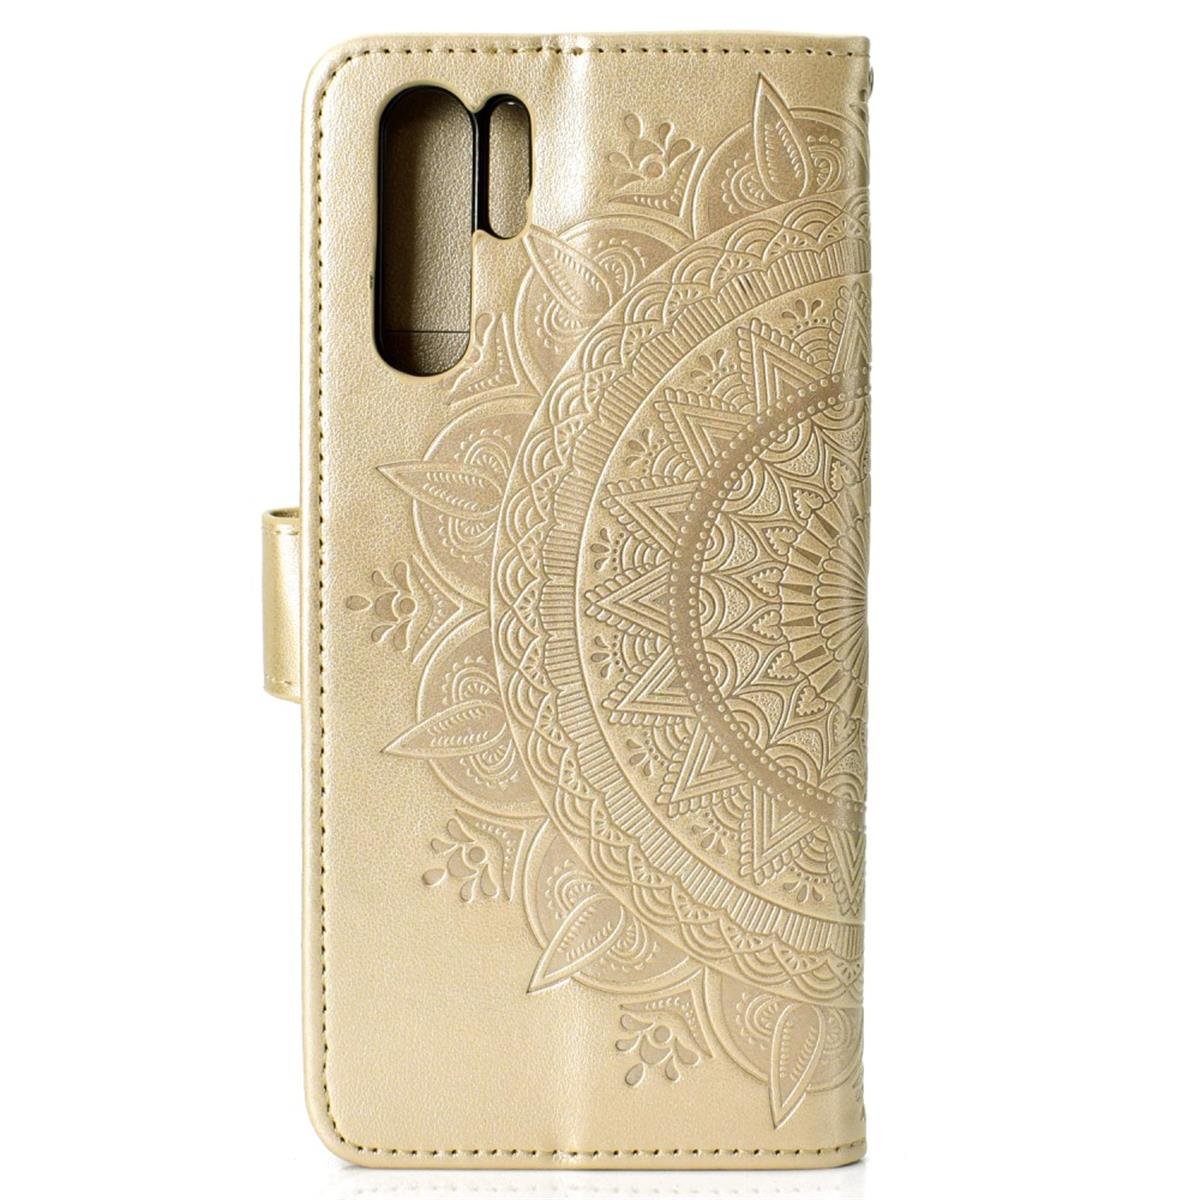 mit Muster, P30 COVERKINGZ Pro, Klapphülle Bookcover, Huawei, Mandala Gold